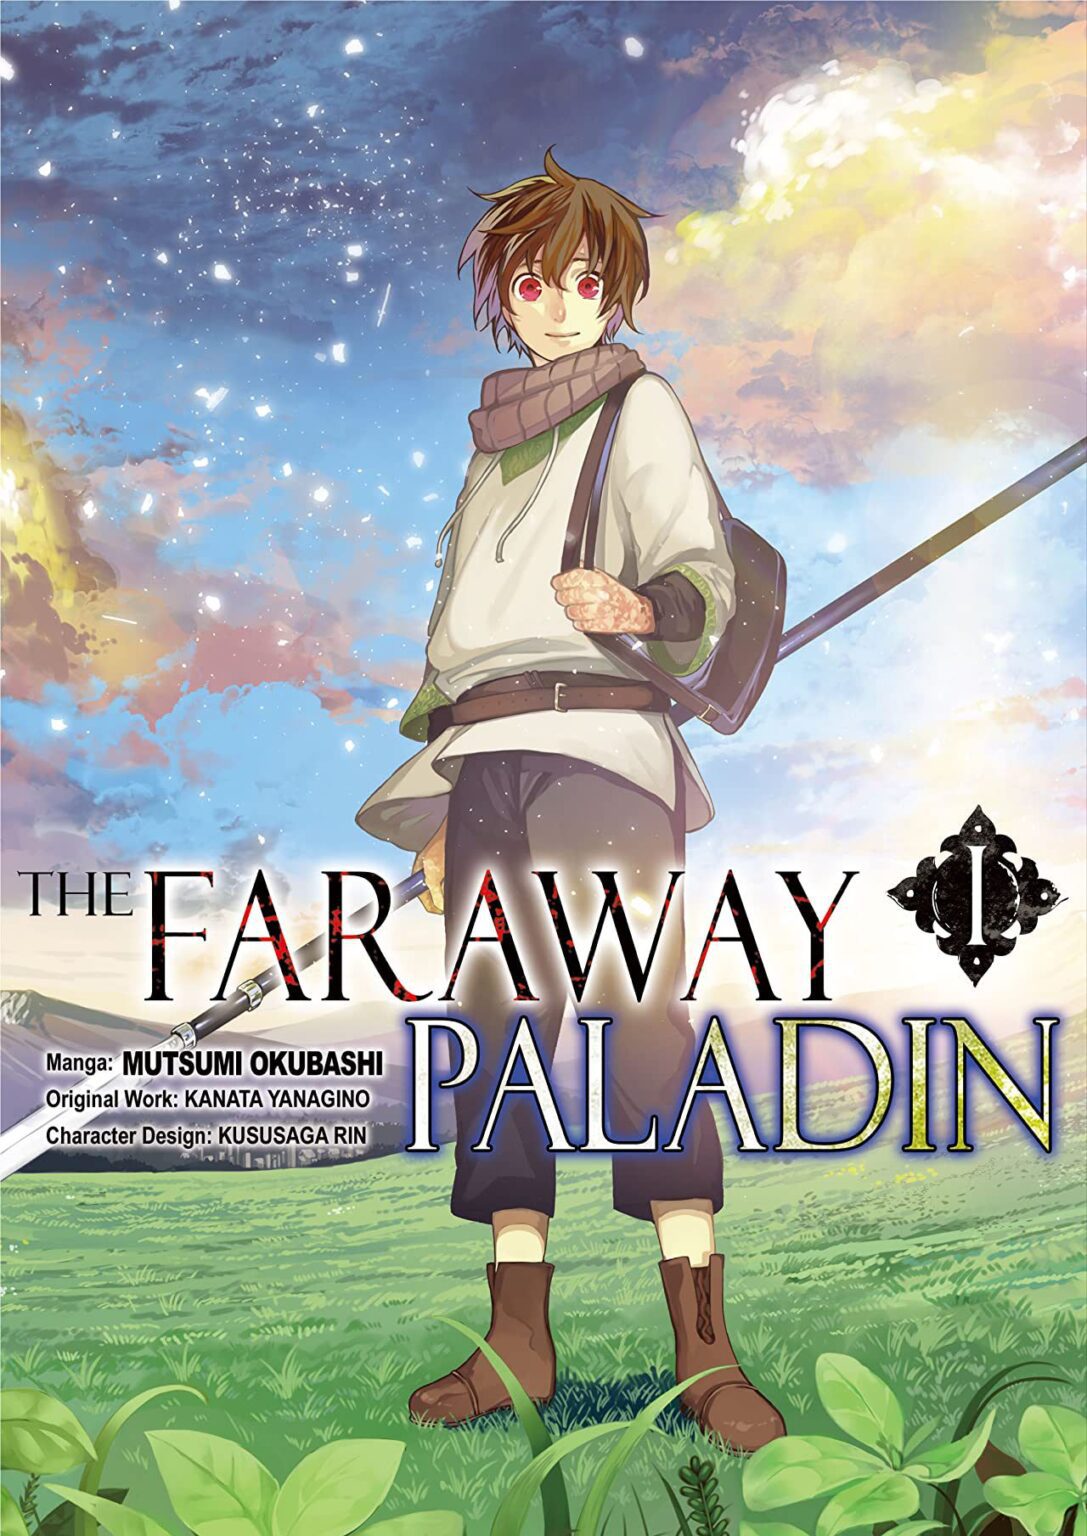 The Faraway Paladin: Trailer and poster for the anime, inspired by the